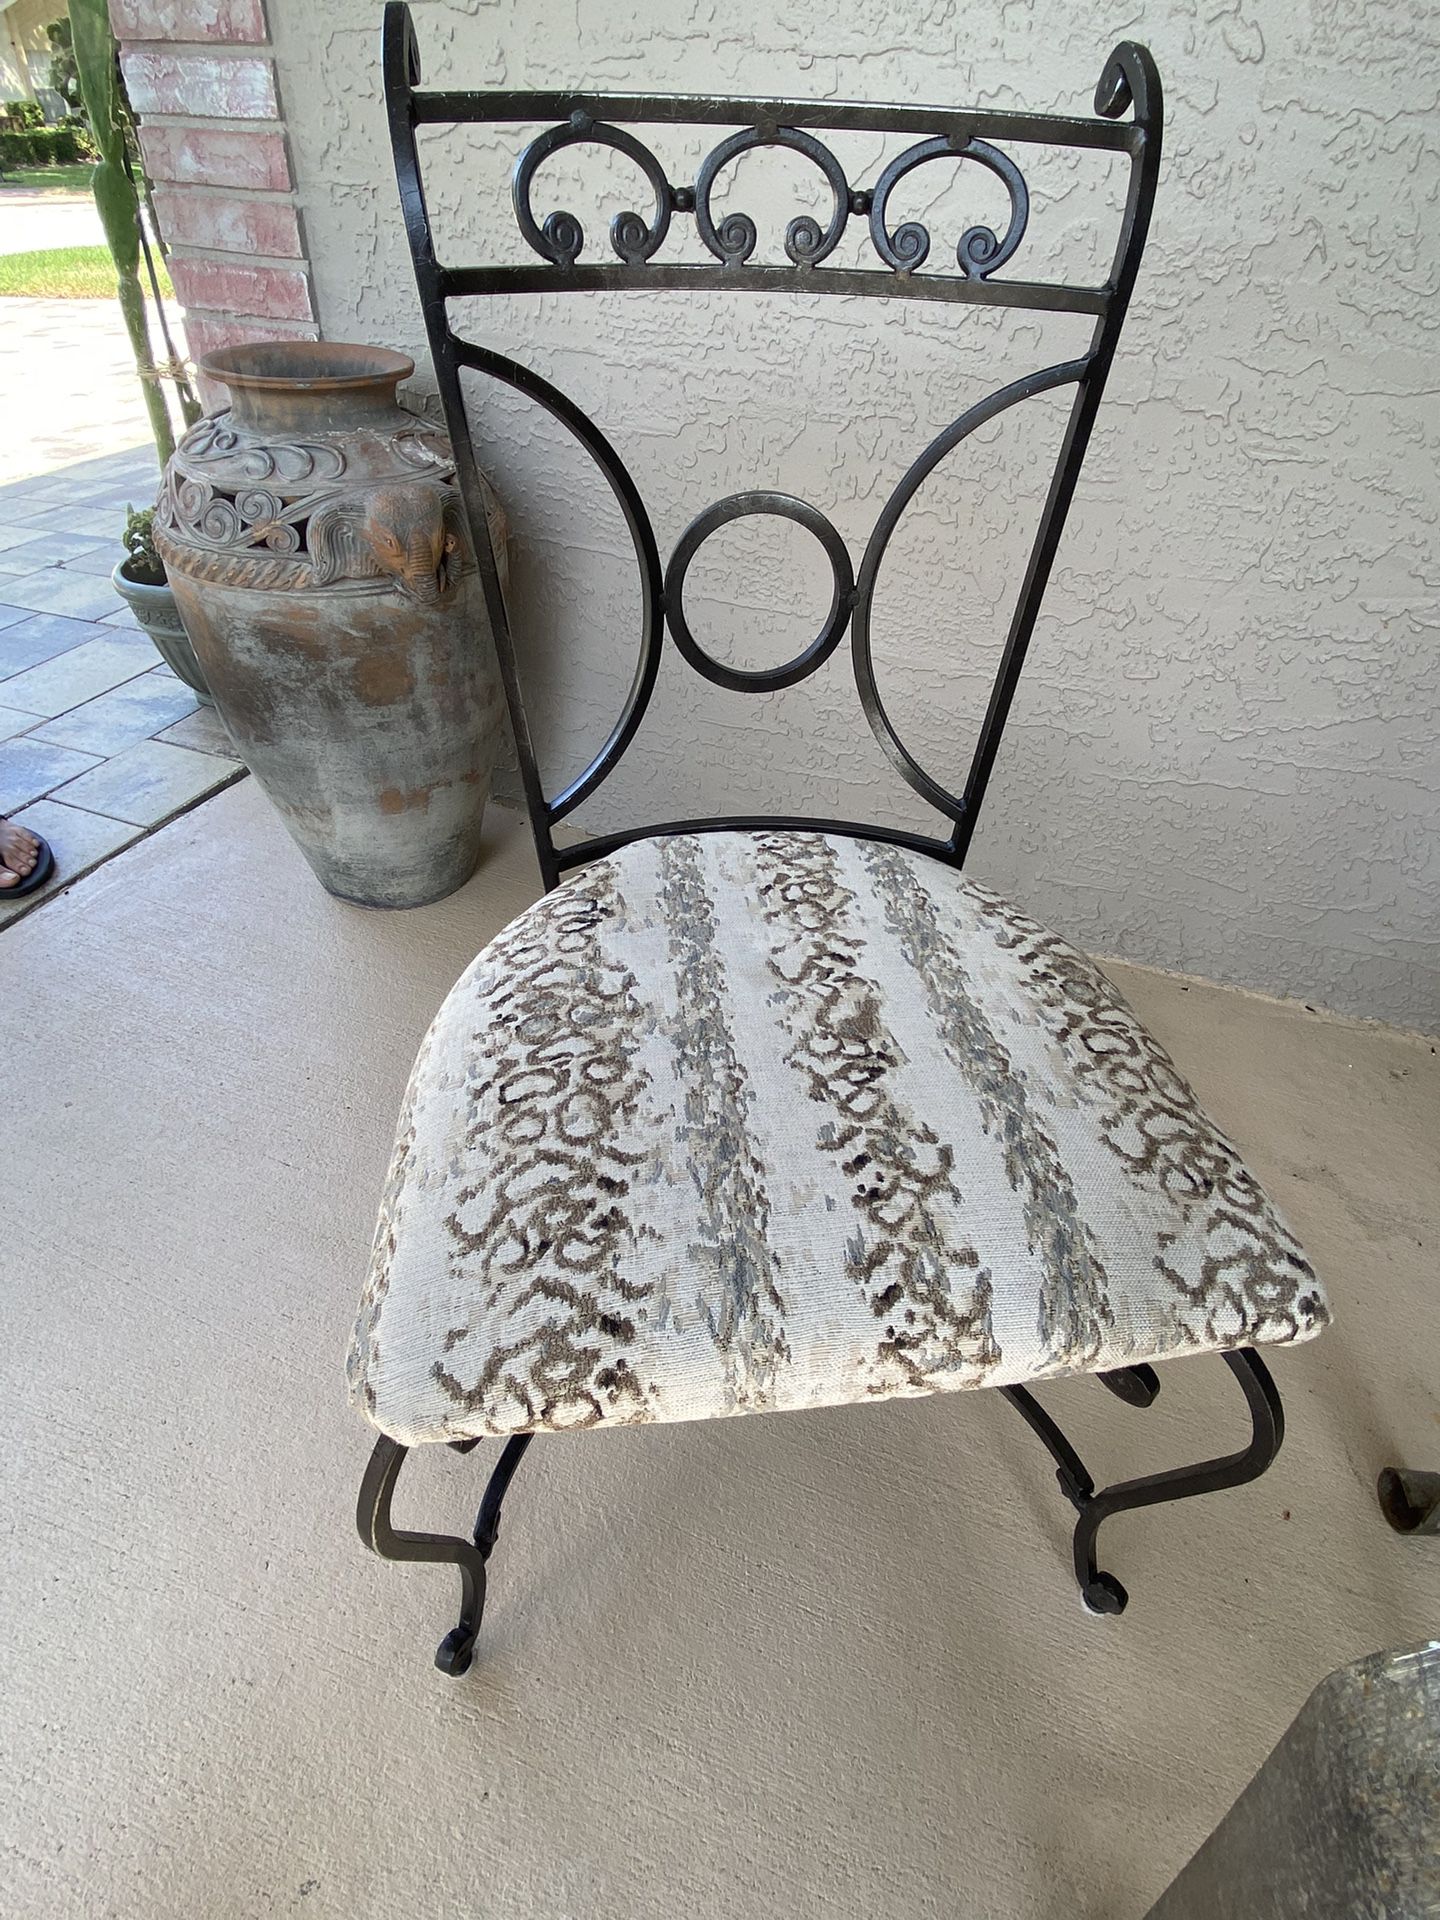 Wrought Iron Chairs (4)